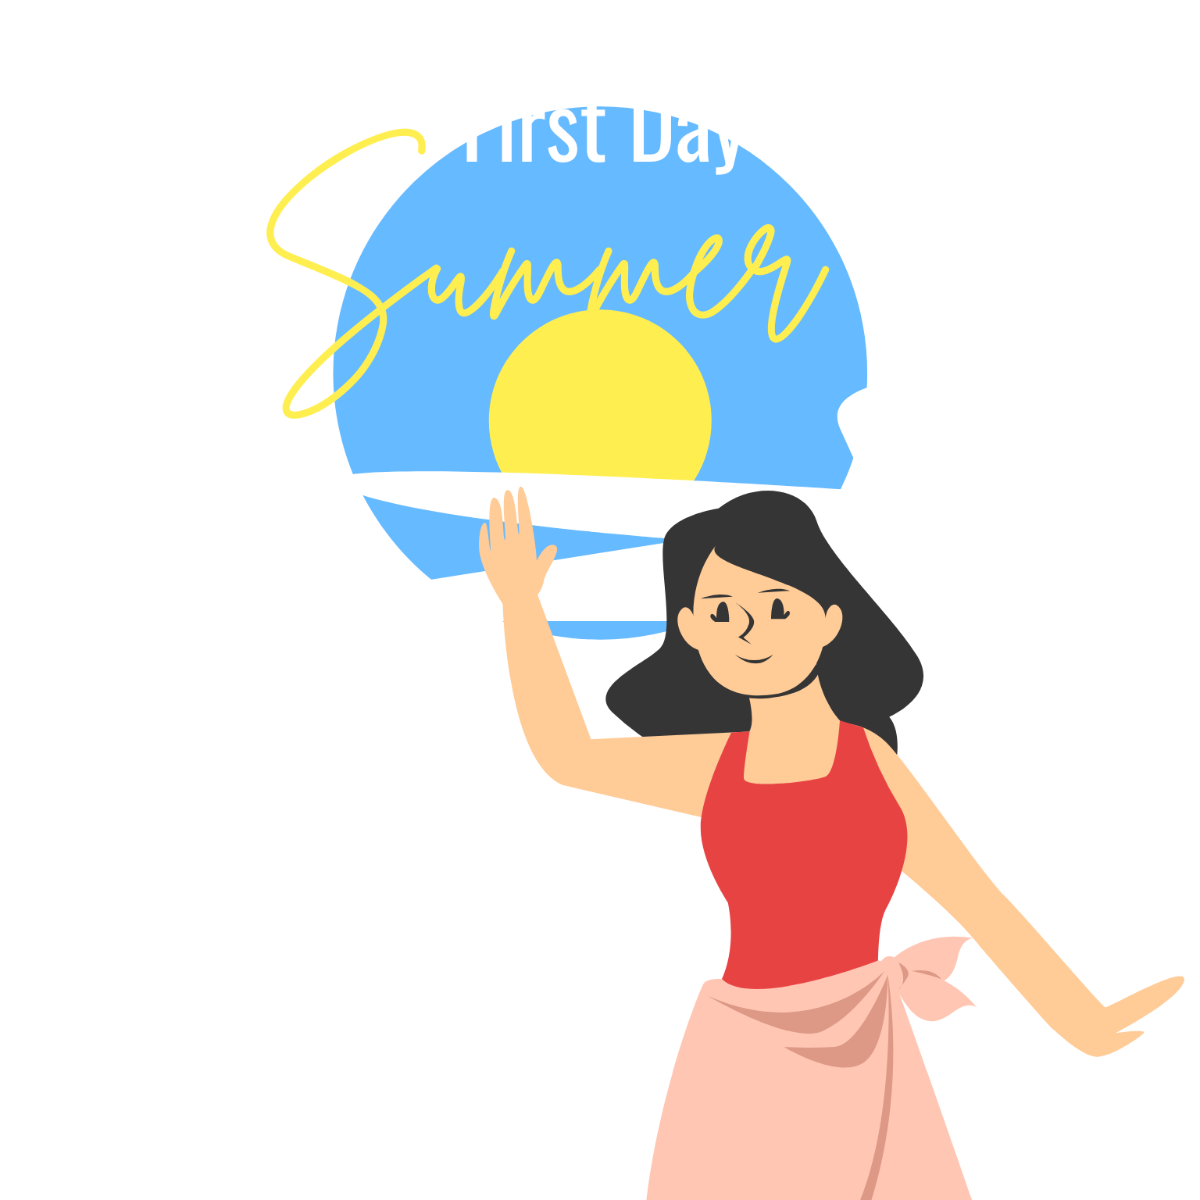 First Day of Summer Illustration Template